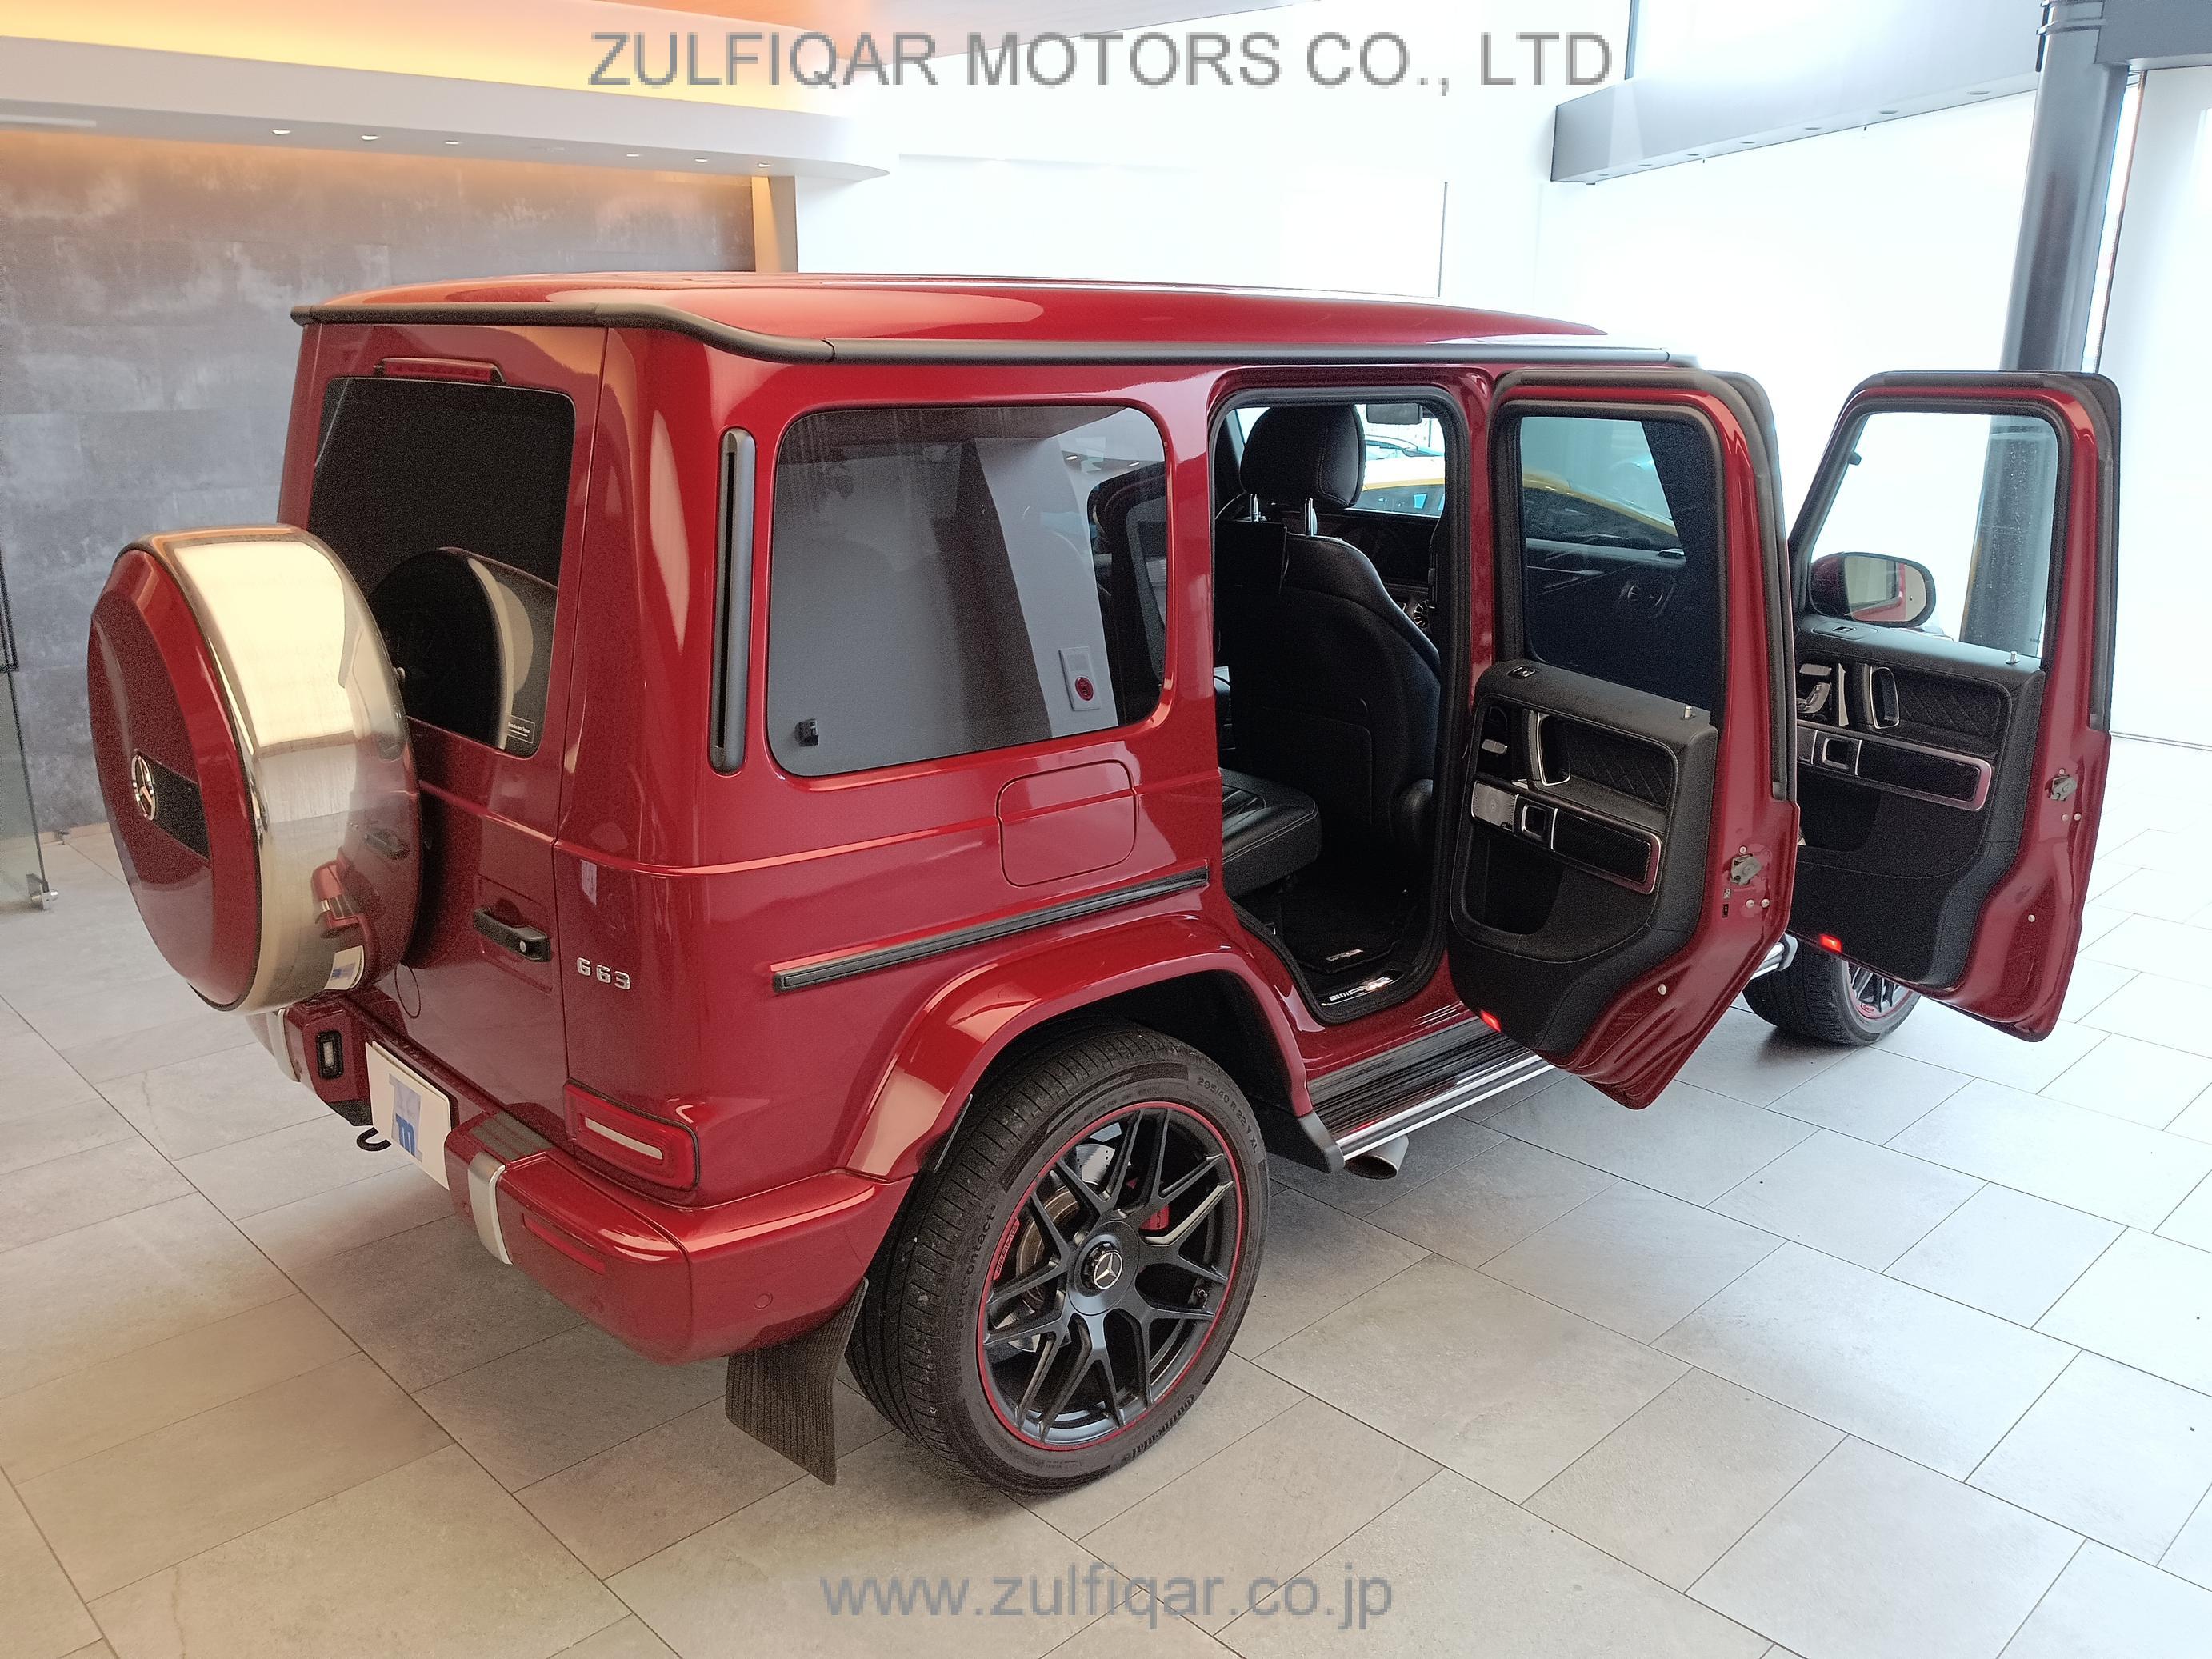 MERCEDES AMG G CLASS 2019 Image 23